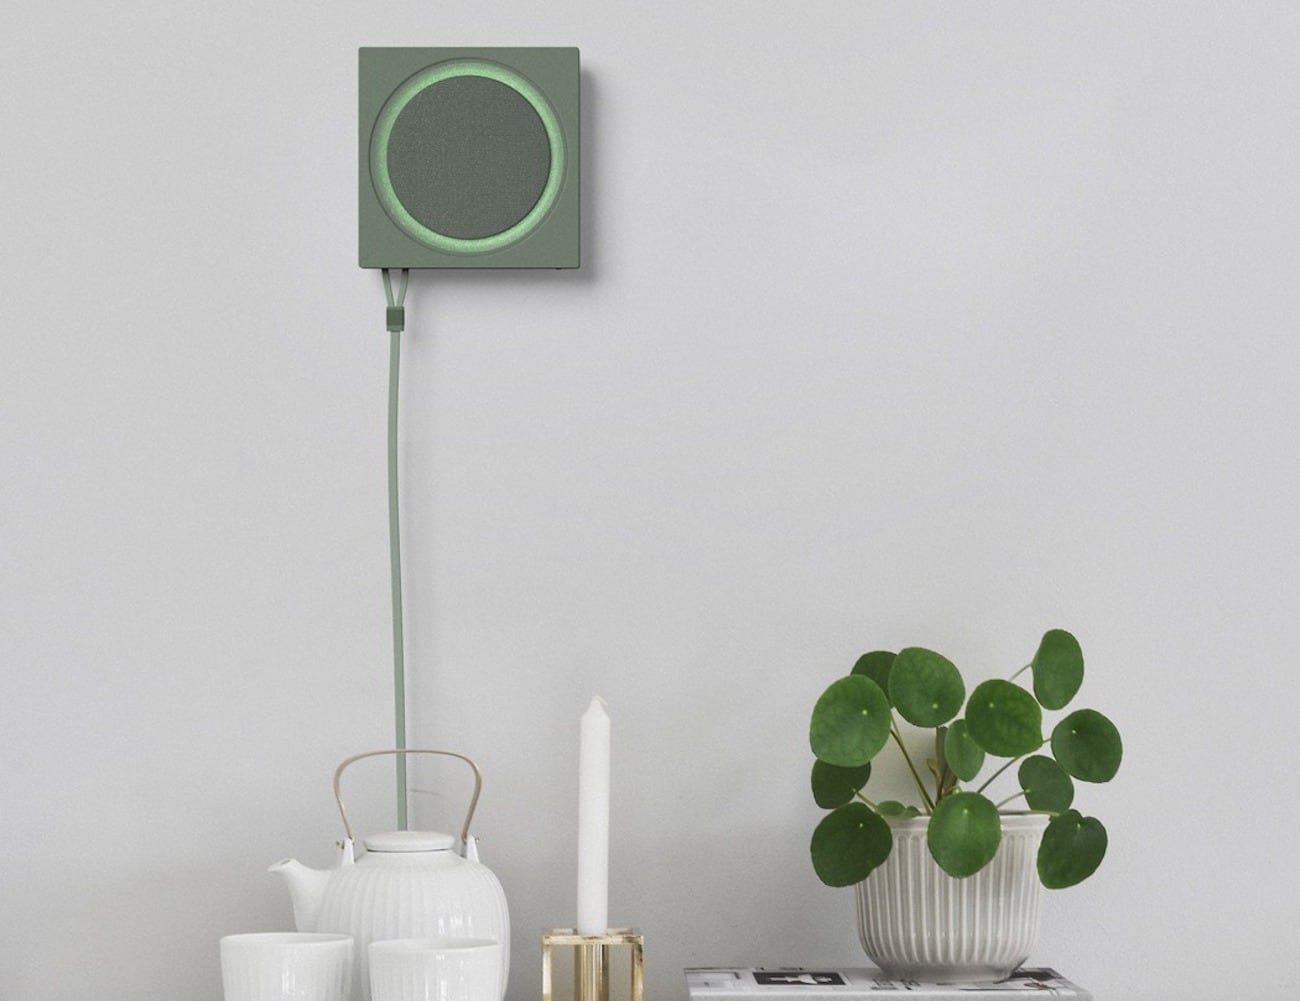 Wall Router Minimalist Hanging Internet Router helps amplify your Wi-Fi signal